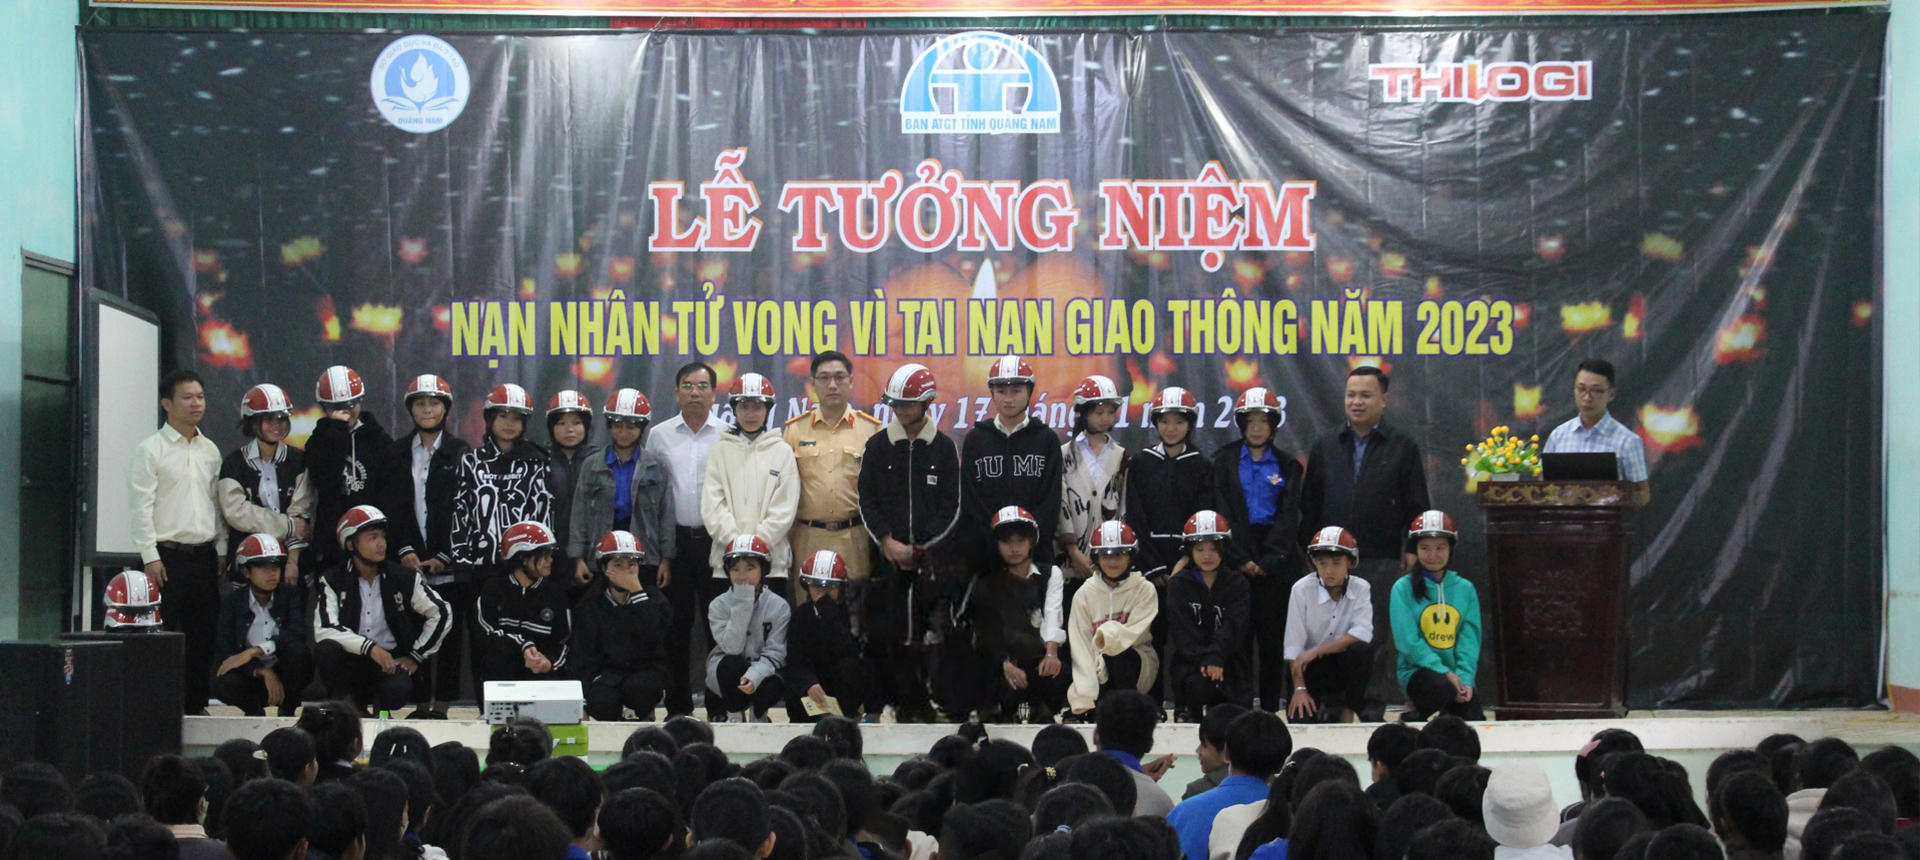 THILOGI sponsors helmets for mountainous students in Phuoc Son district